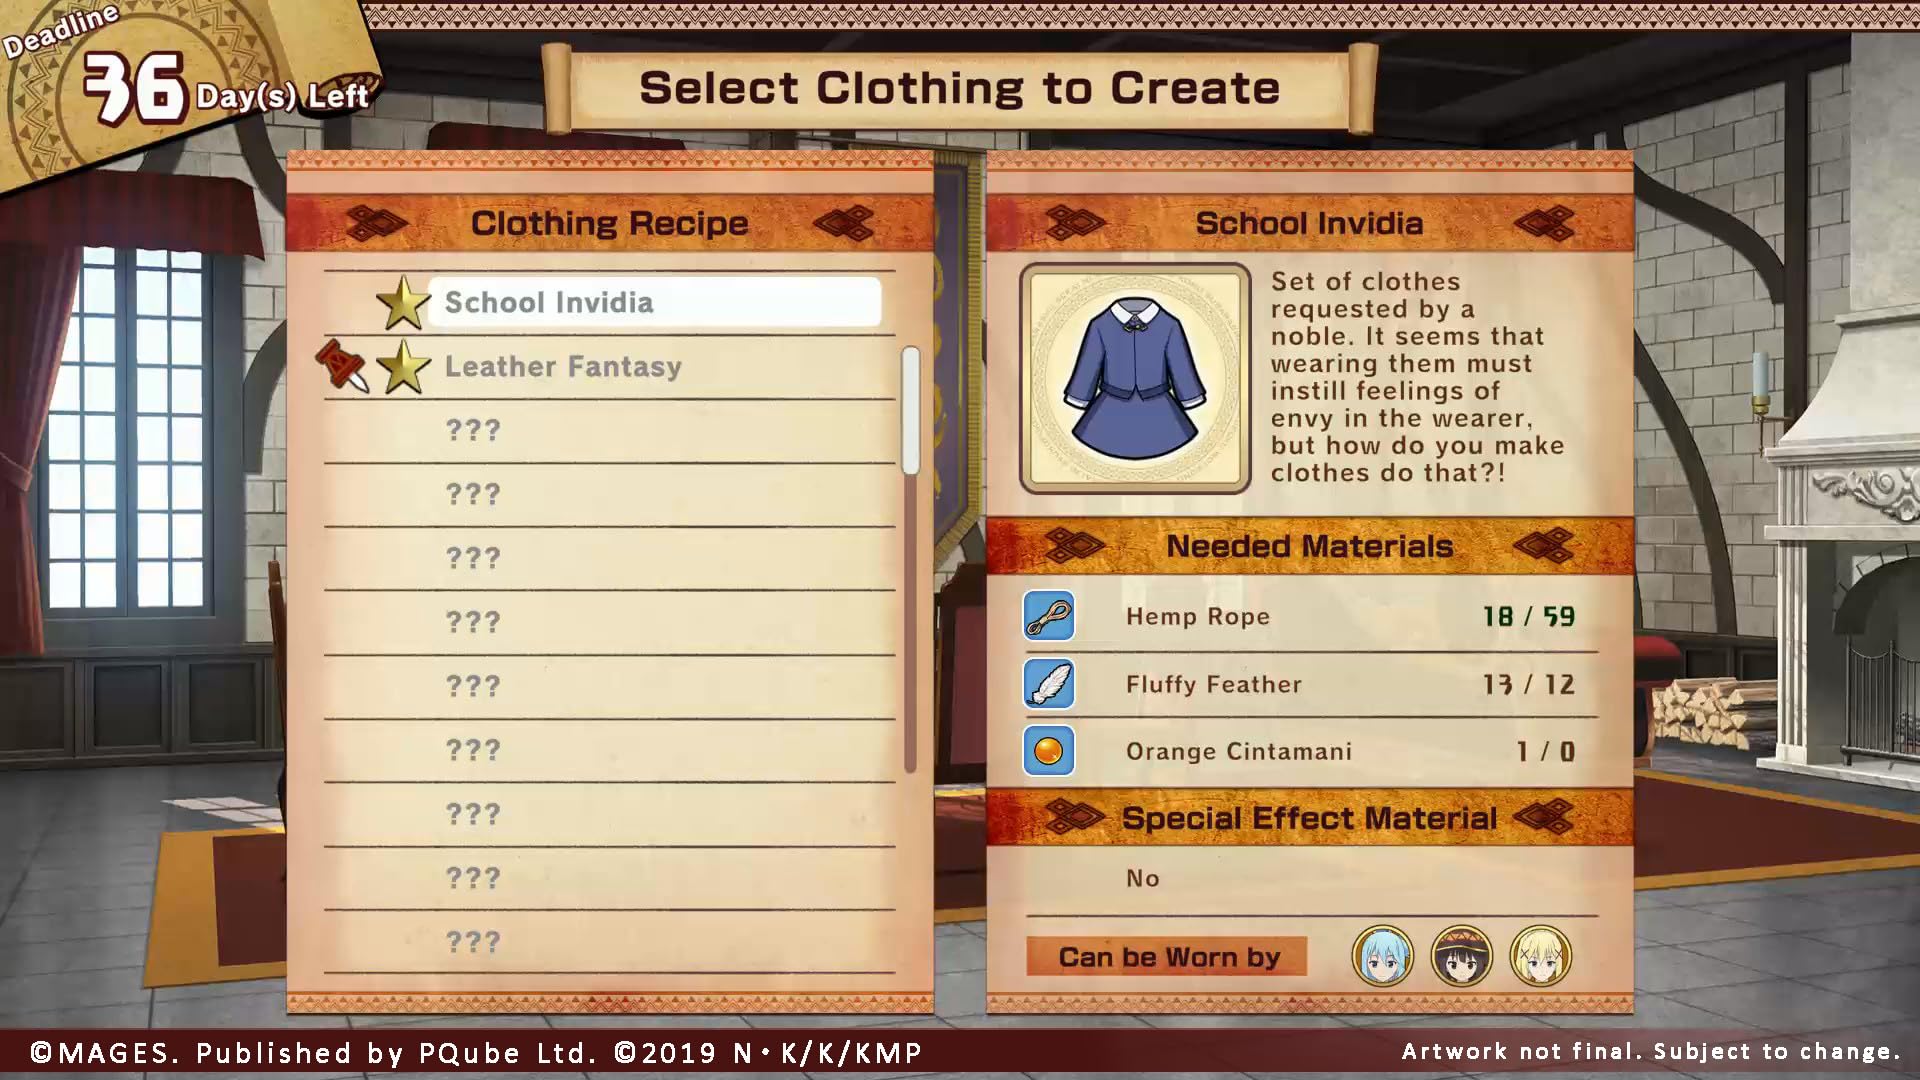 KONOSUBA - God's Blessing on this Wonderful World! Love For These Clothes Of Desire! - Nintendo Switch